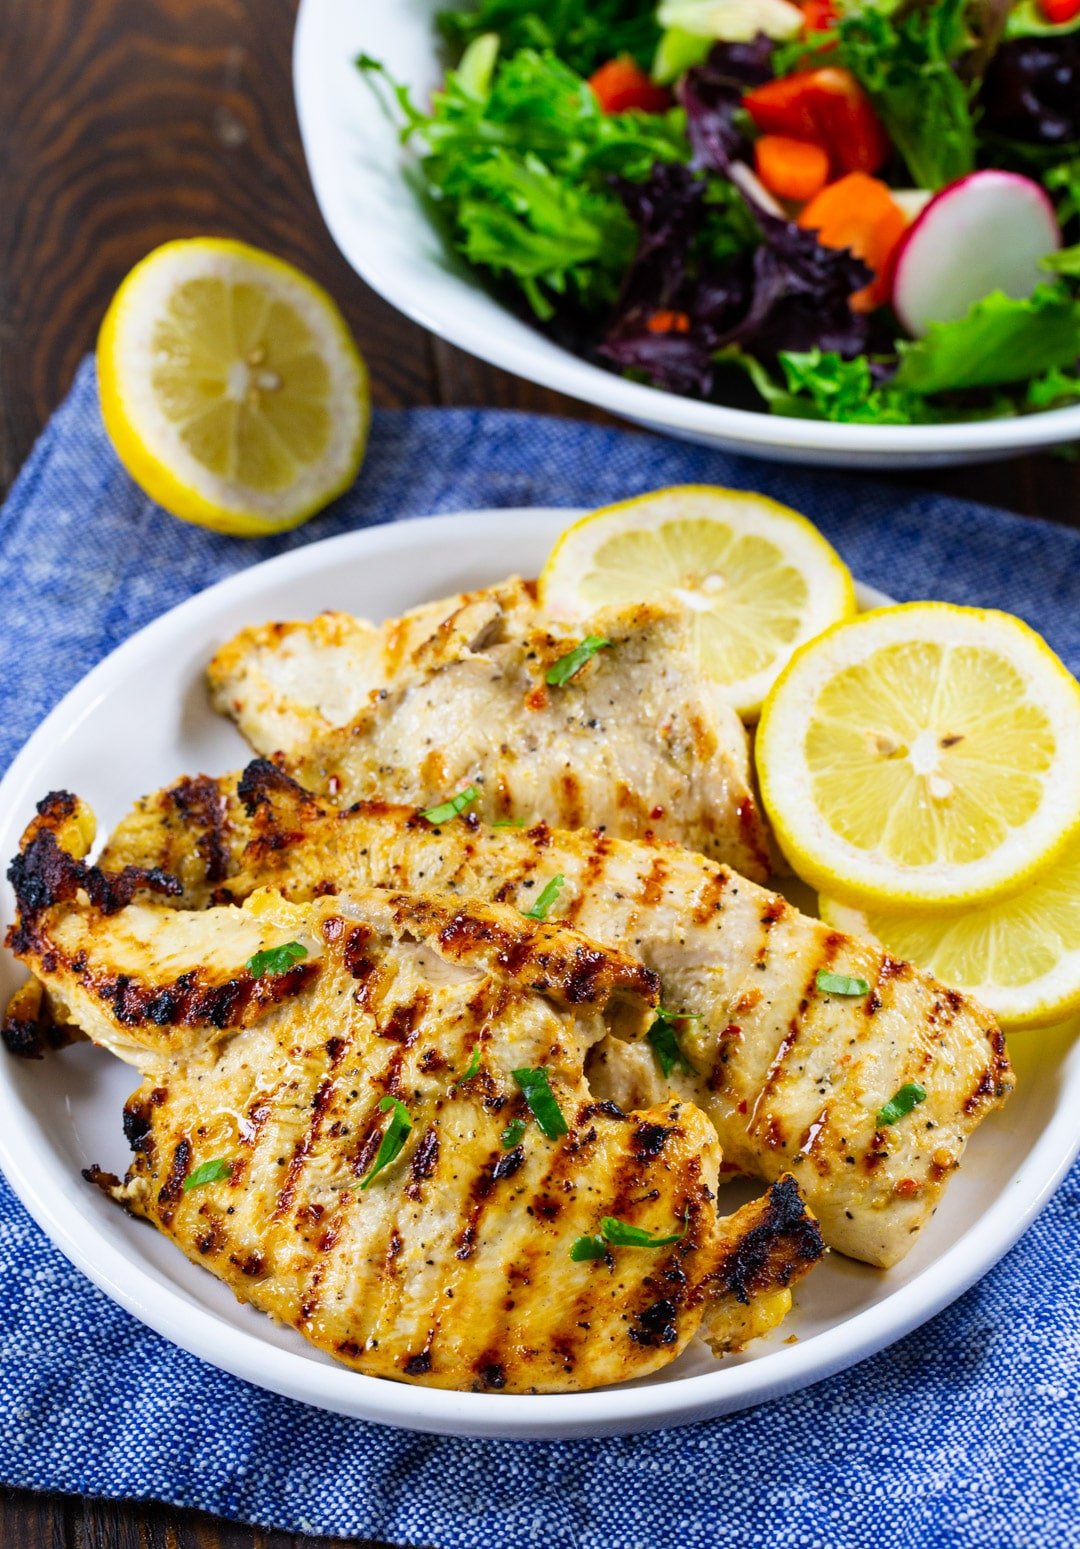 Grilled chicken on a plate with lemon slices.